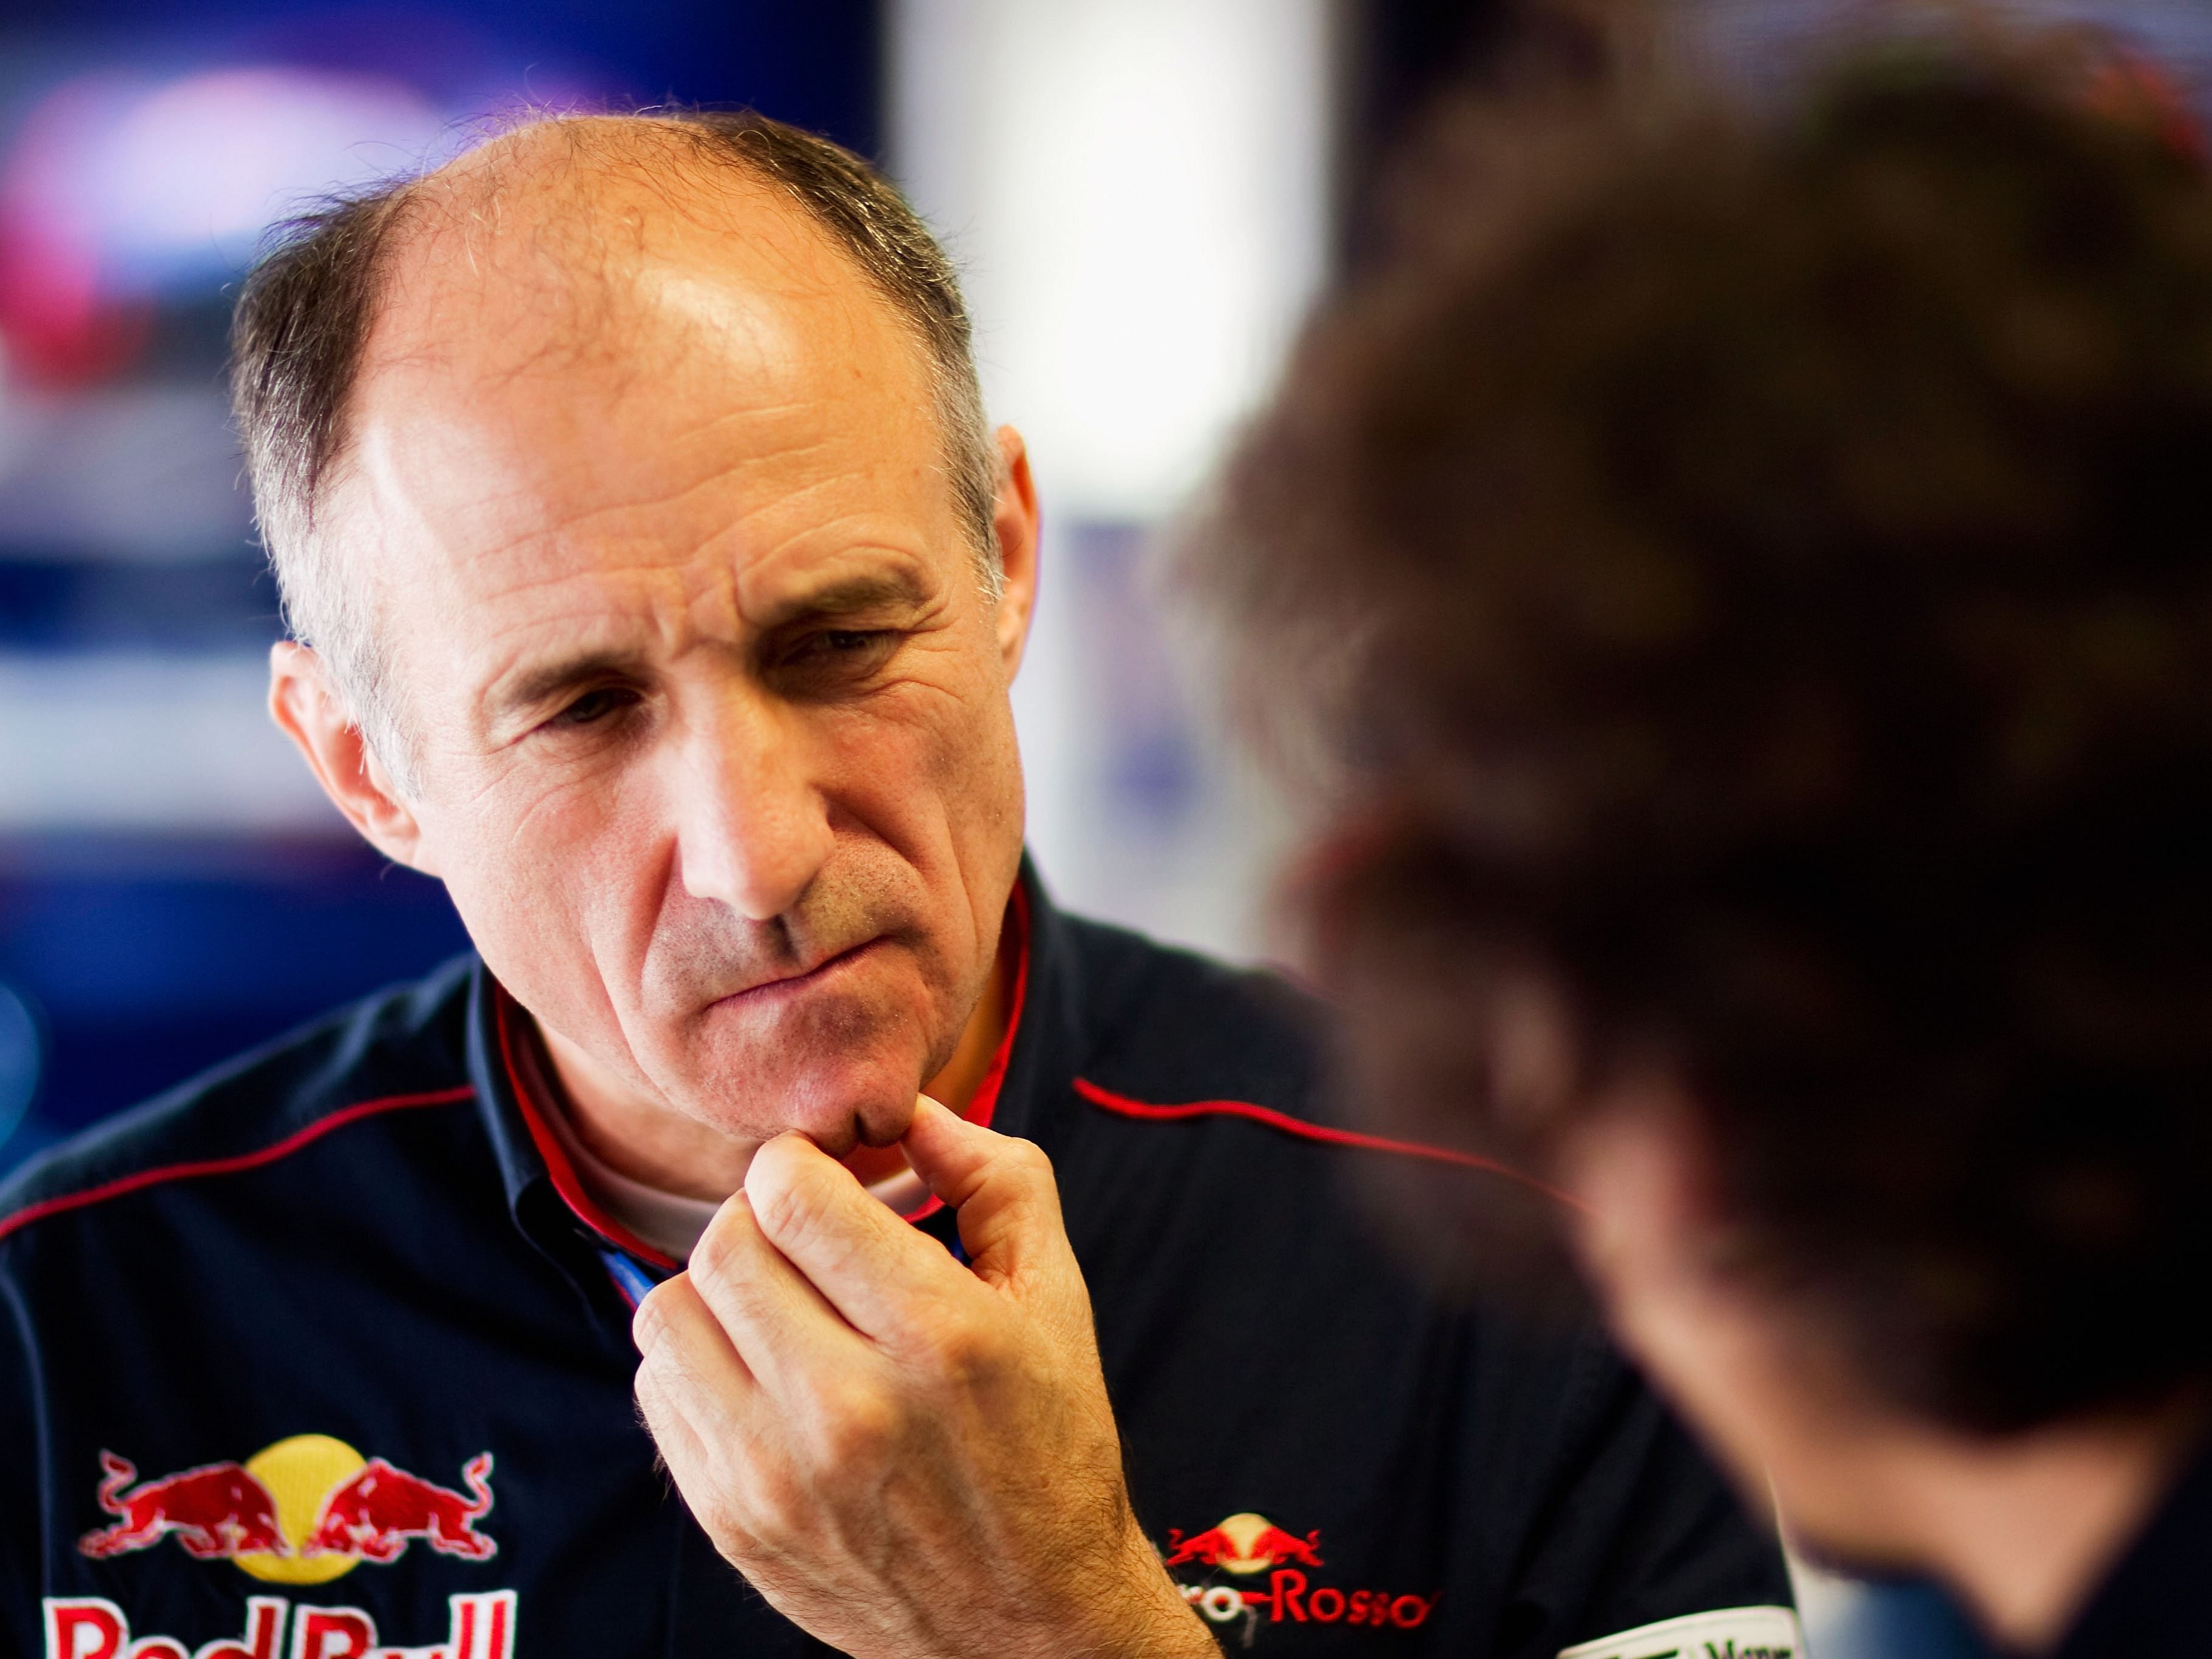 Scuderia Toro Rosso Team Principal Franz Tost (L) talks with Chief Engineer Laurent Mekies (R) during practice for the 2010 F1 Italian Grand Prix. (Photo by Peter Fox/Getty Images)